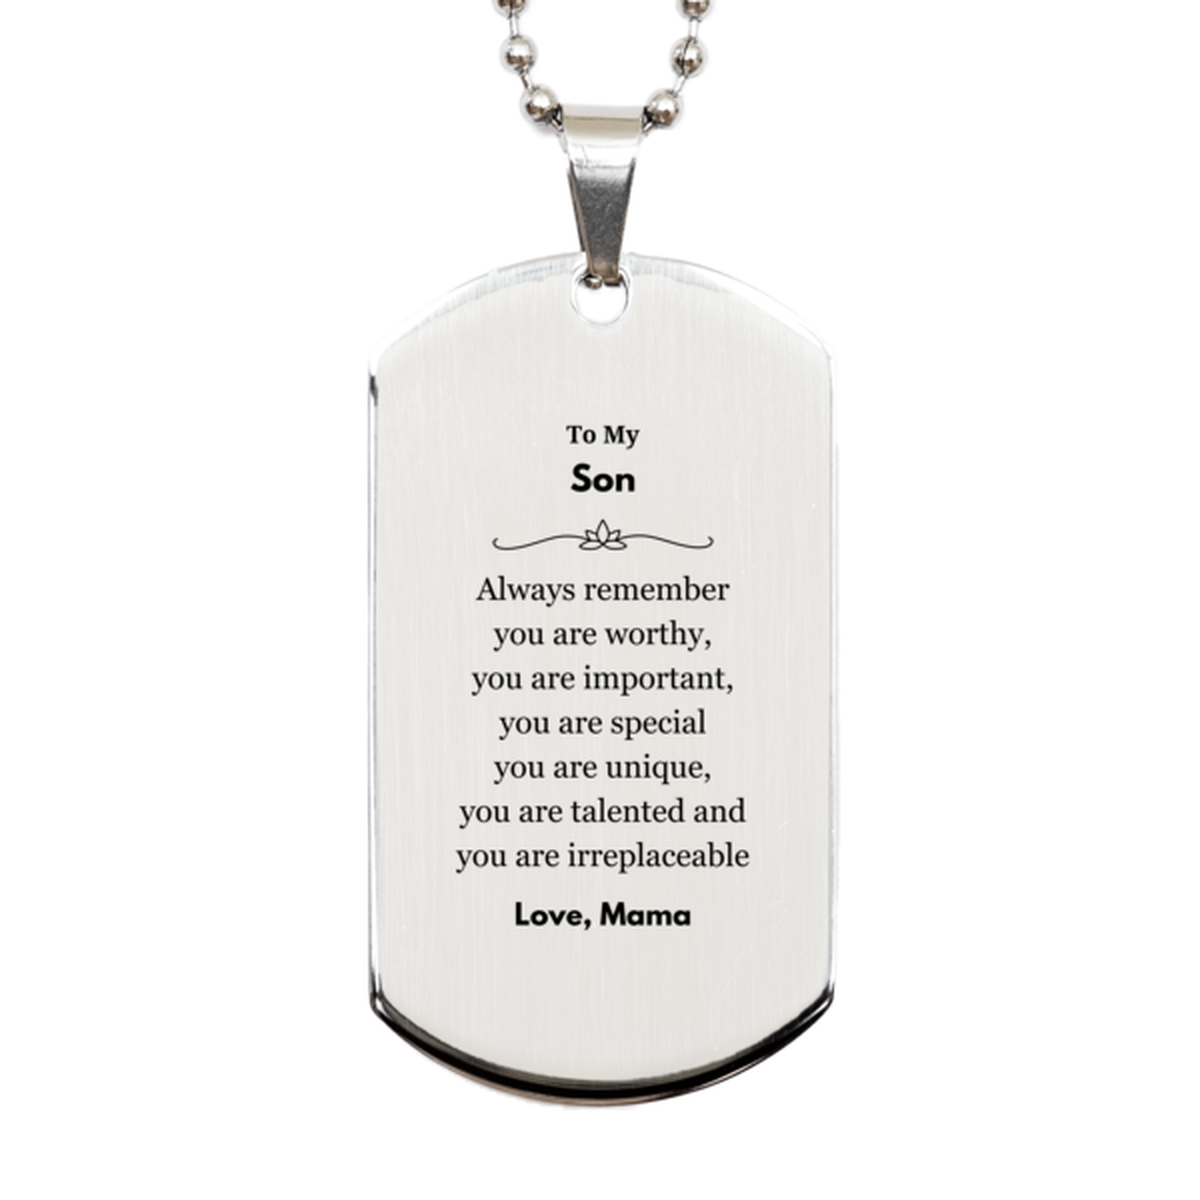 Son Birthday Gifts from Mama, Inspirational Silver Dog Tag for Son Christmas Graduation Gifts for Son Always remember you are worthy, you are important. Love, Mama